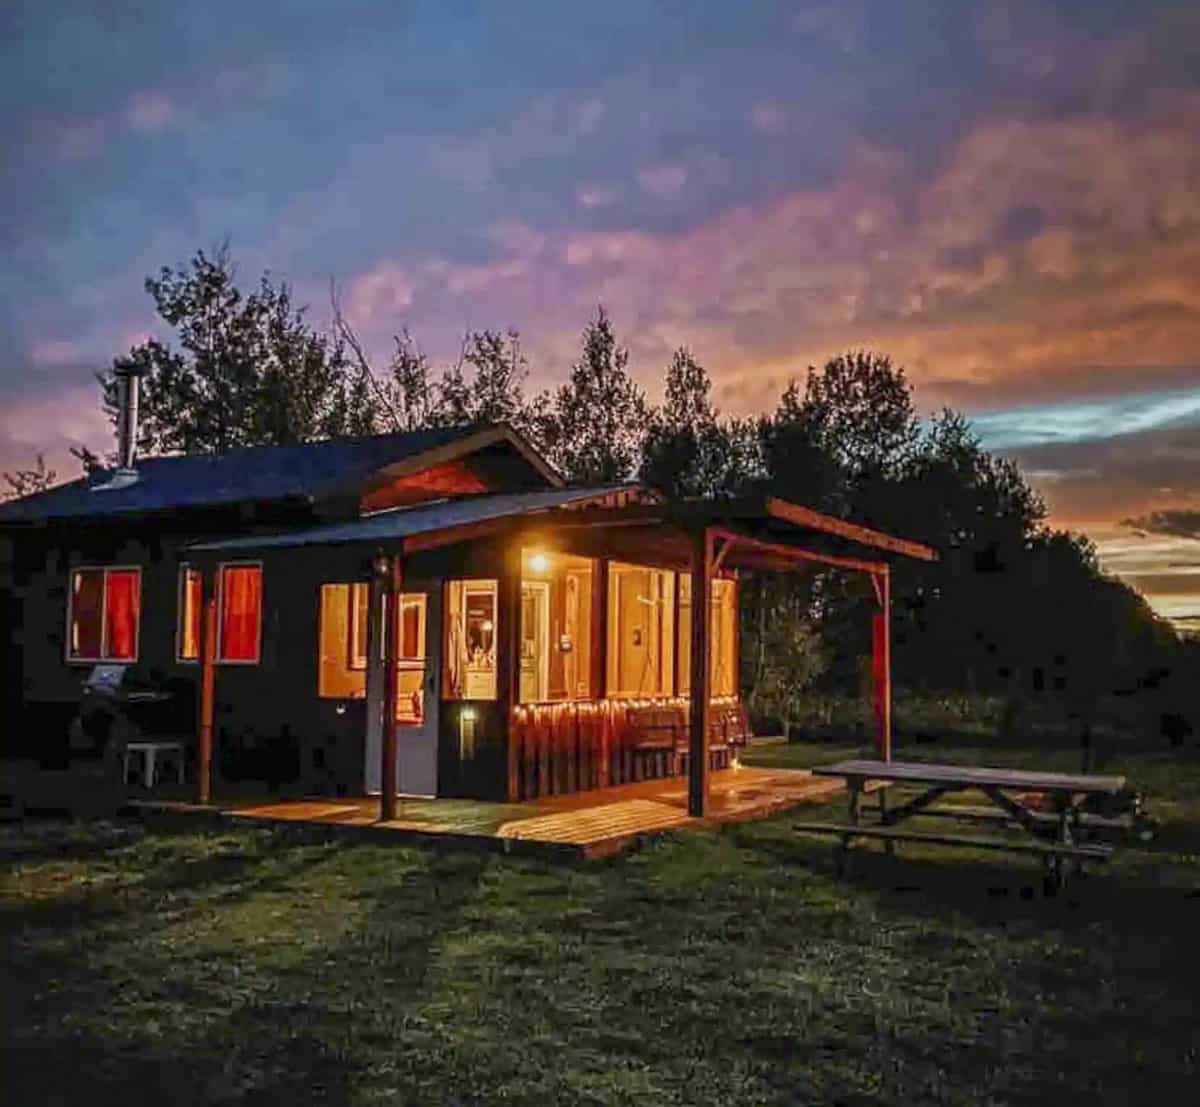 Piney Tamarack Shack - sunsets are a thing of beauty when staying at this Manitoba cabin.